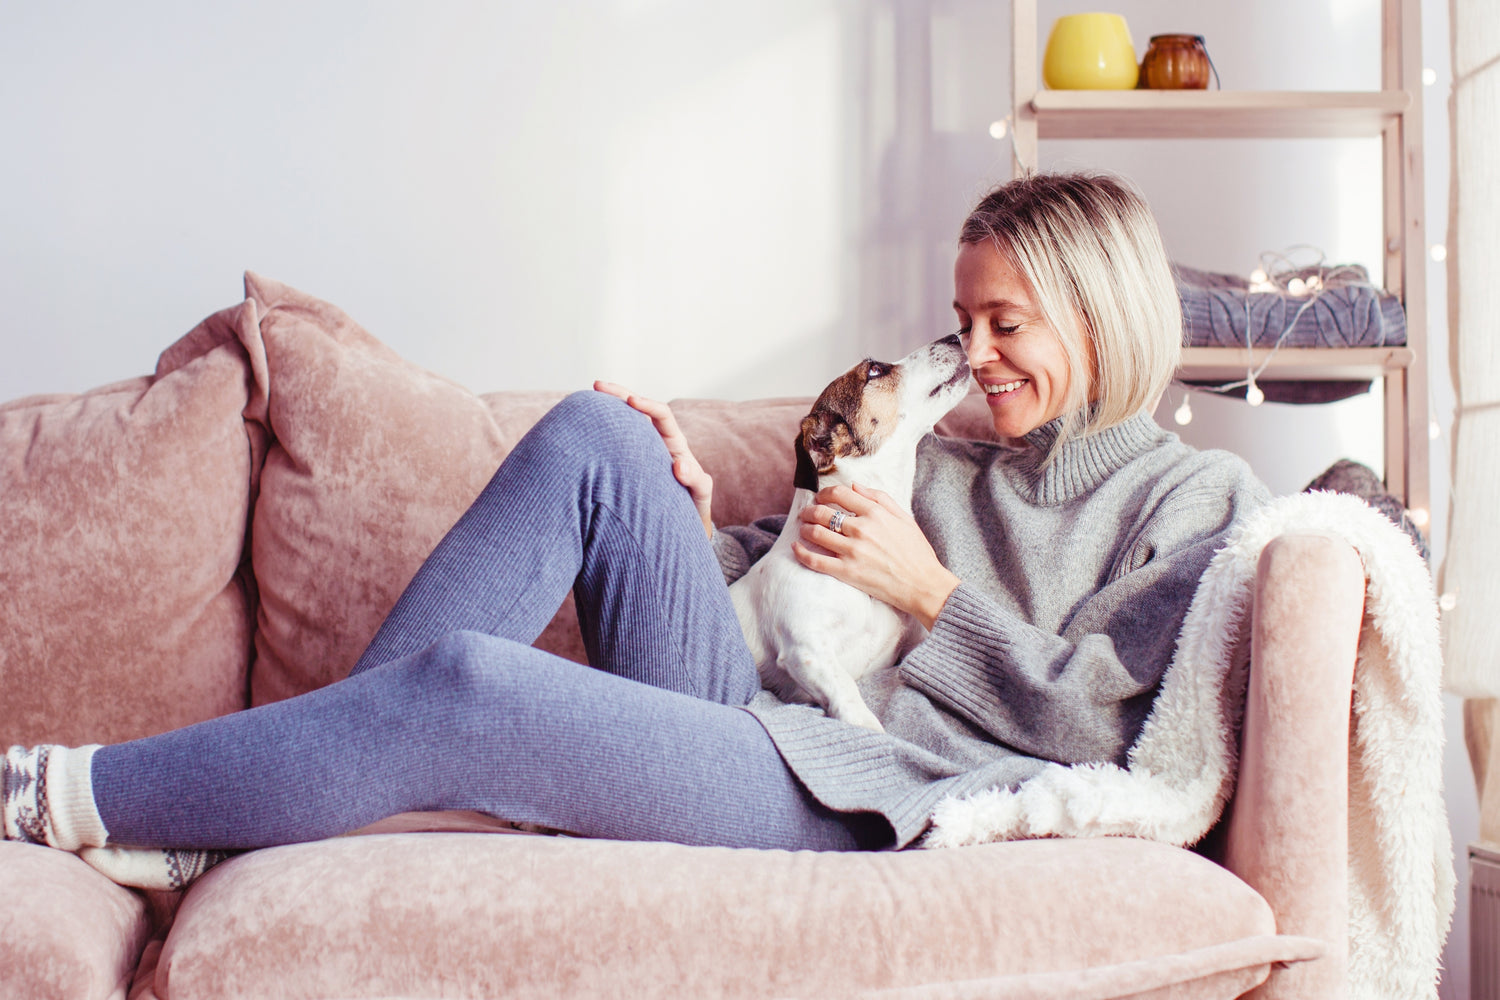 A smiling woman sitting on a comfortable couch with her loyal dog by her side. They both look relaxed and content.